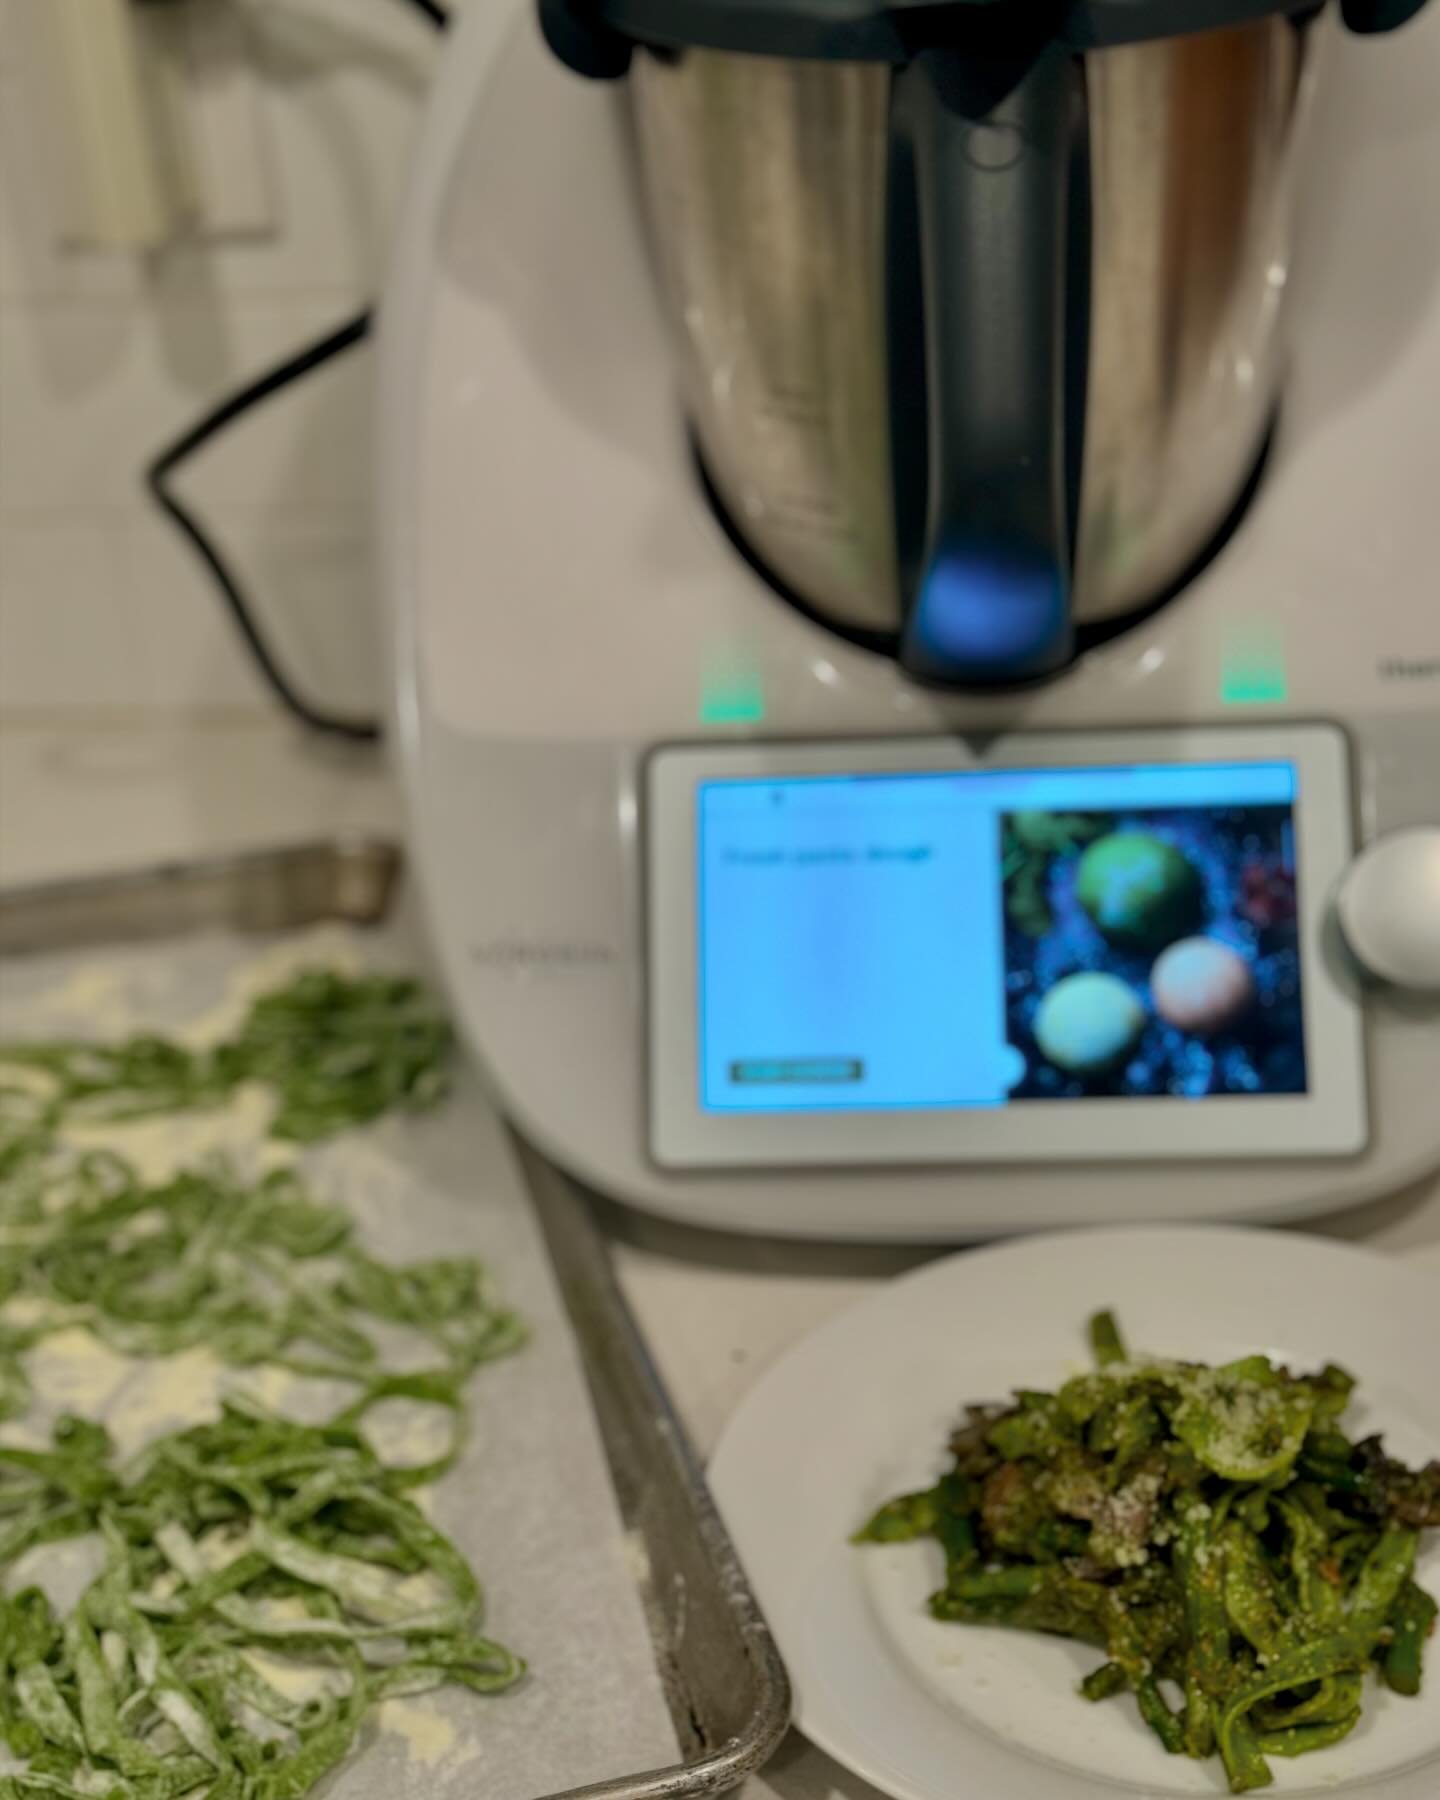 Fresh Spinach pasta dough made in my Thermomix ! I have been making fresh pasta dough for a long time. I teach pasta classes several times a month. Just created a new class for spring with lots of fresh veggies. I decided to include a  green spinach 